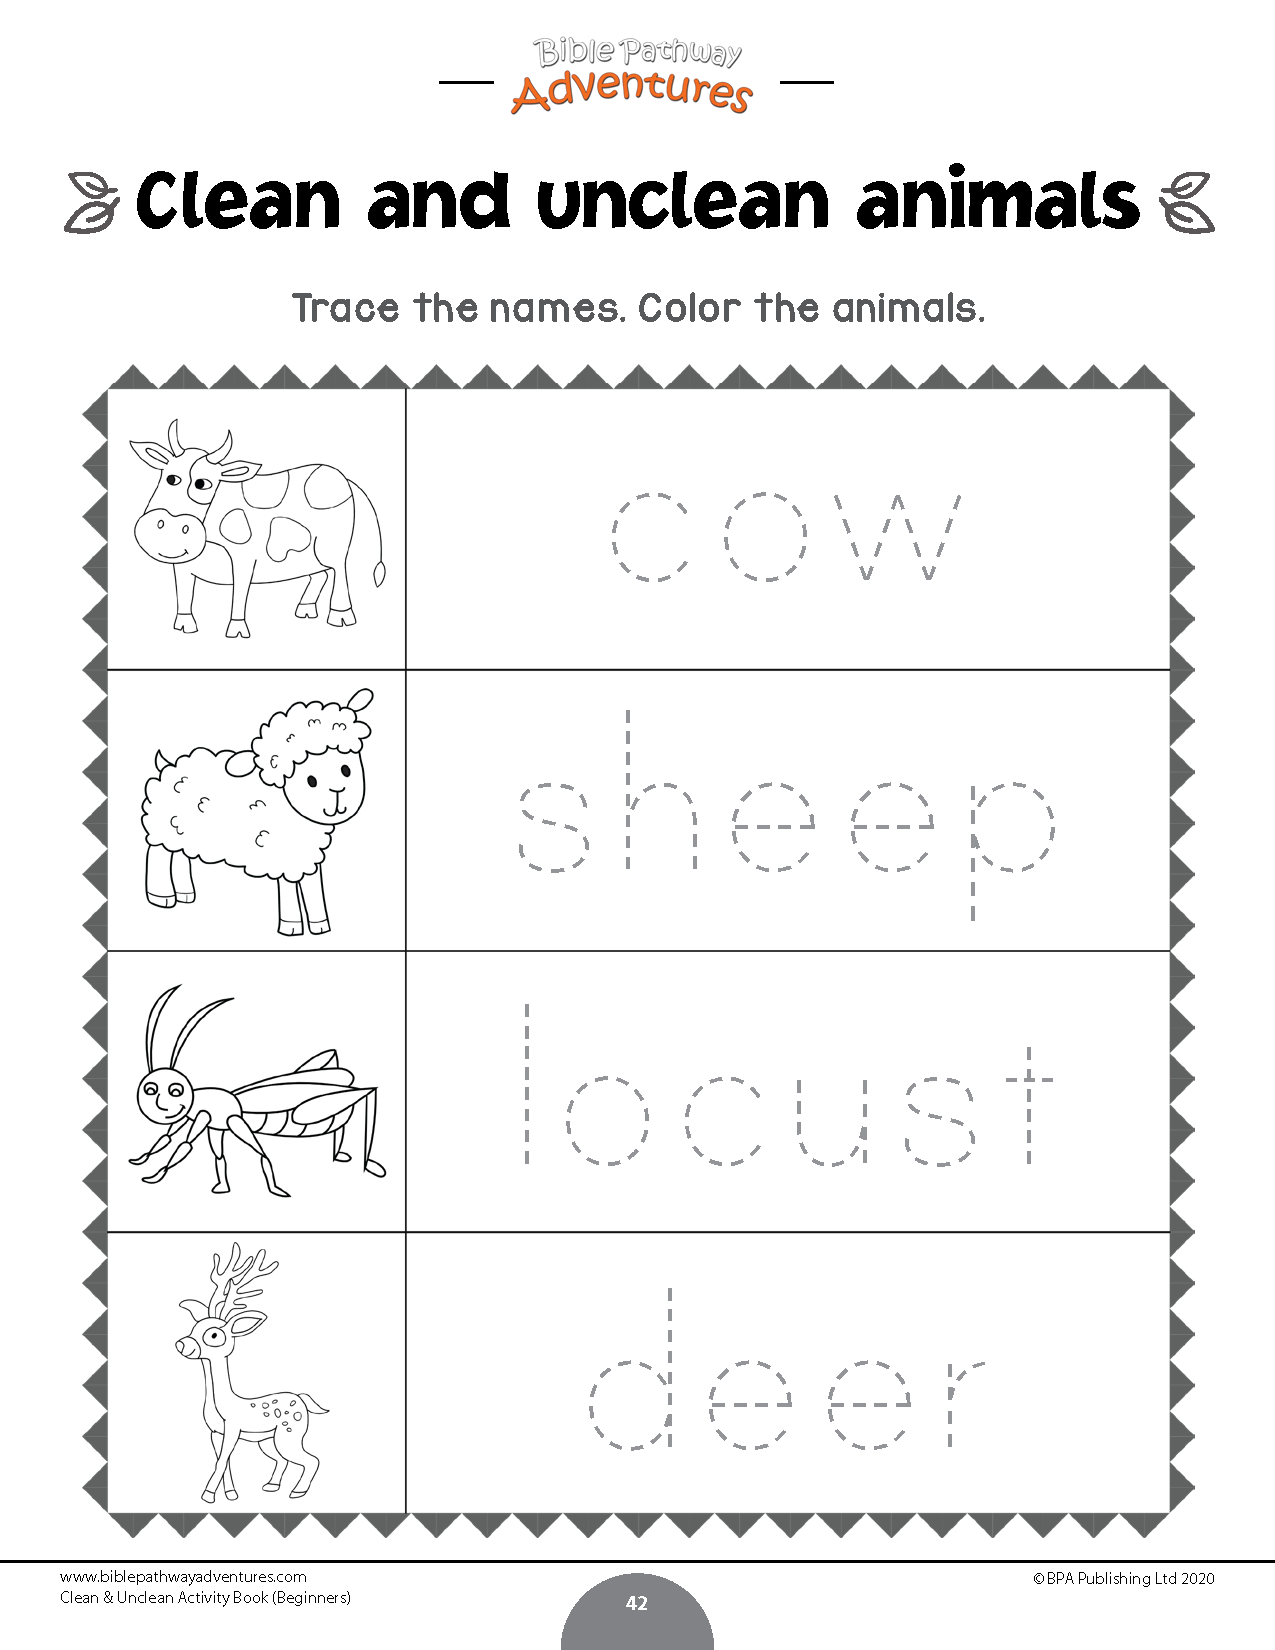 Clean and Unclean Activity Book for Beginners (PDF)